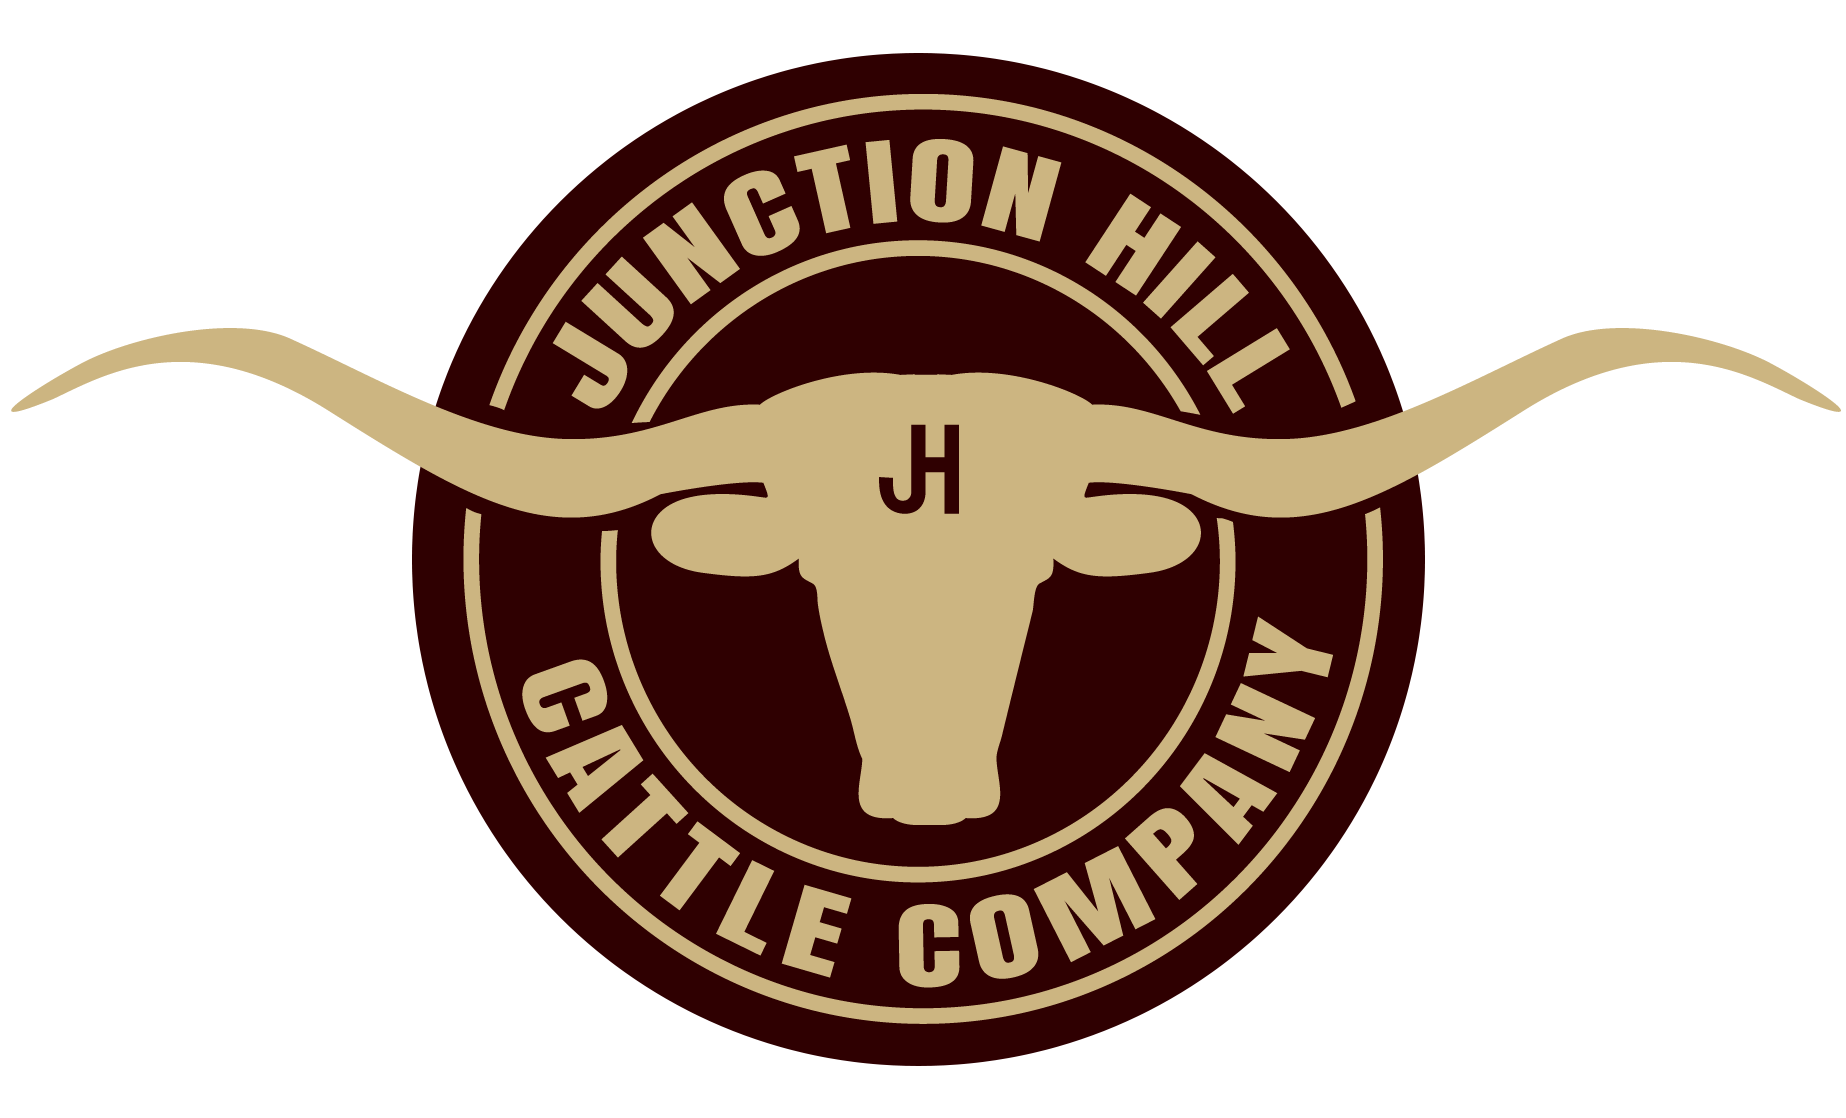 Junction Hill Cattle Company